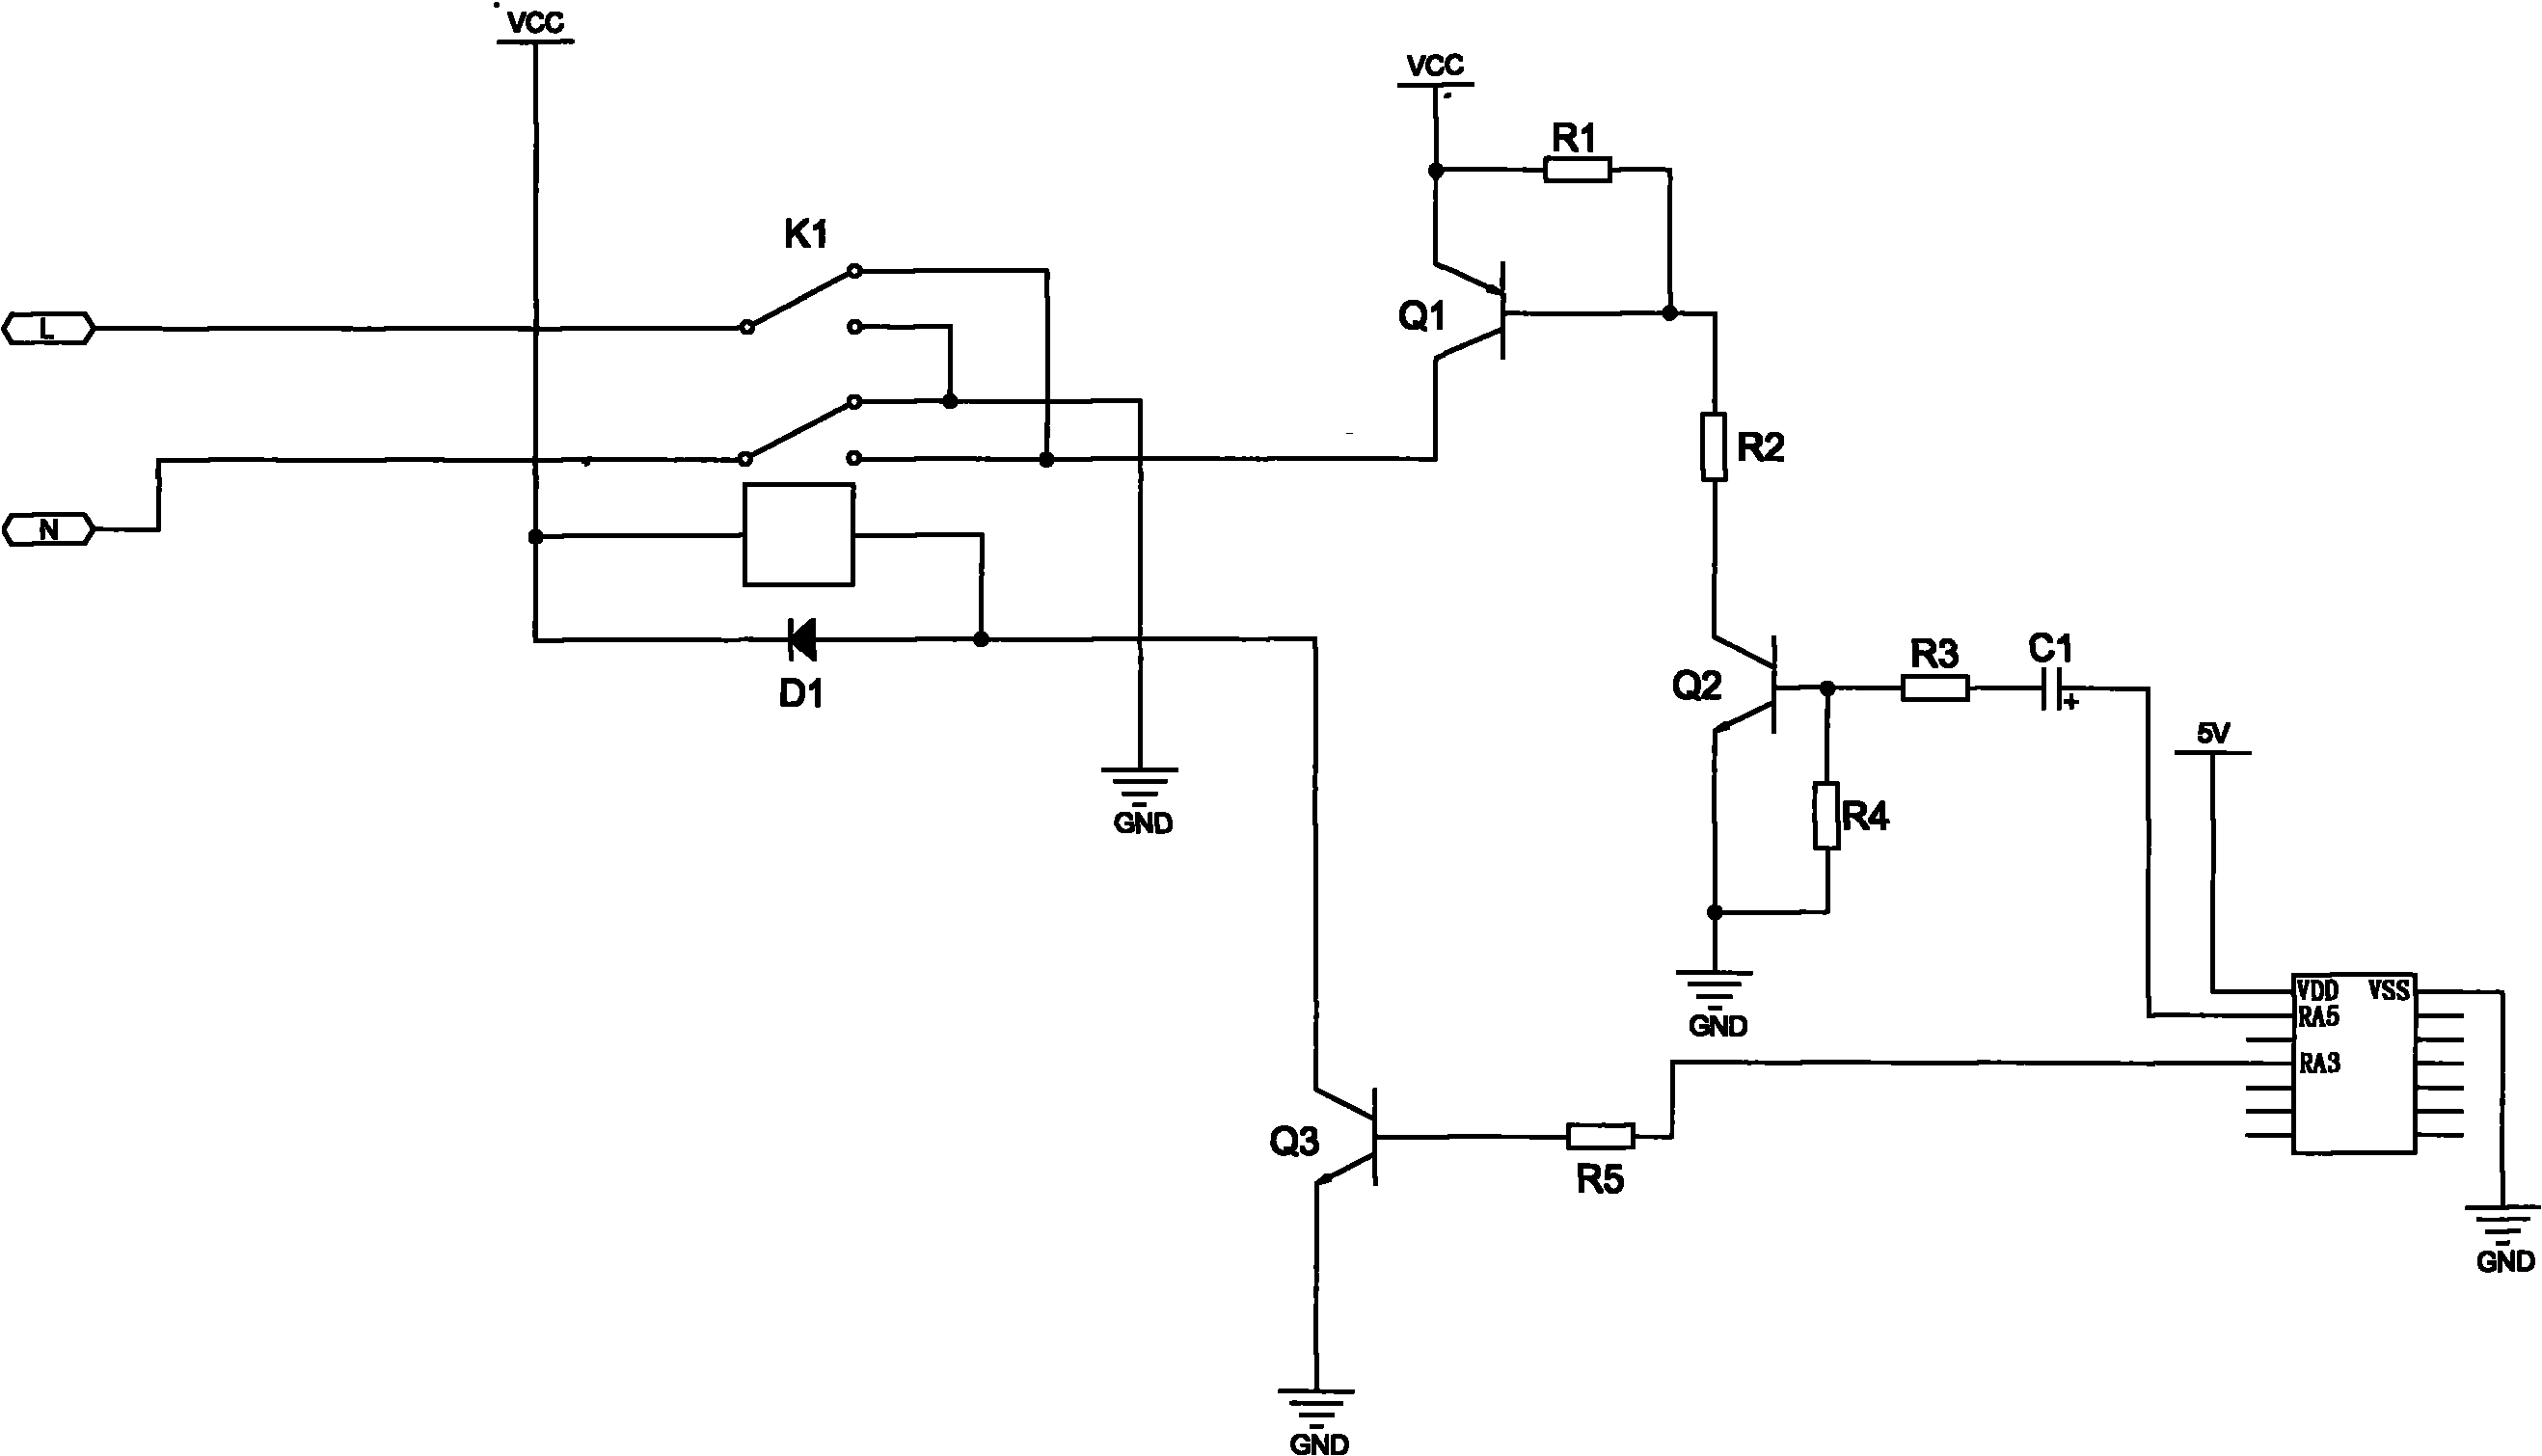 Motor constant-speed forward/reverse rotation control circuit